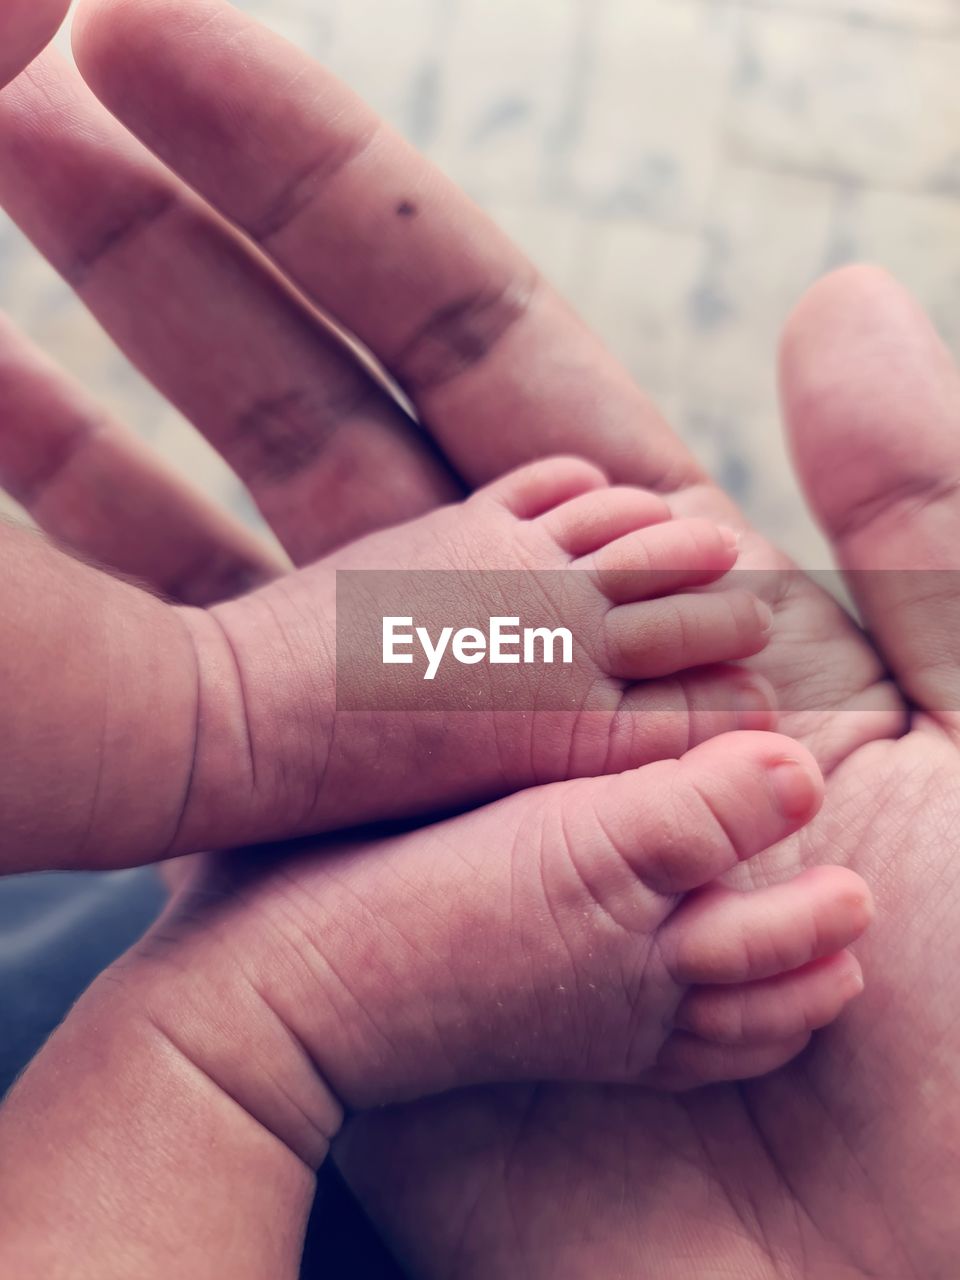 Close-up of baby feet in palm of hand